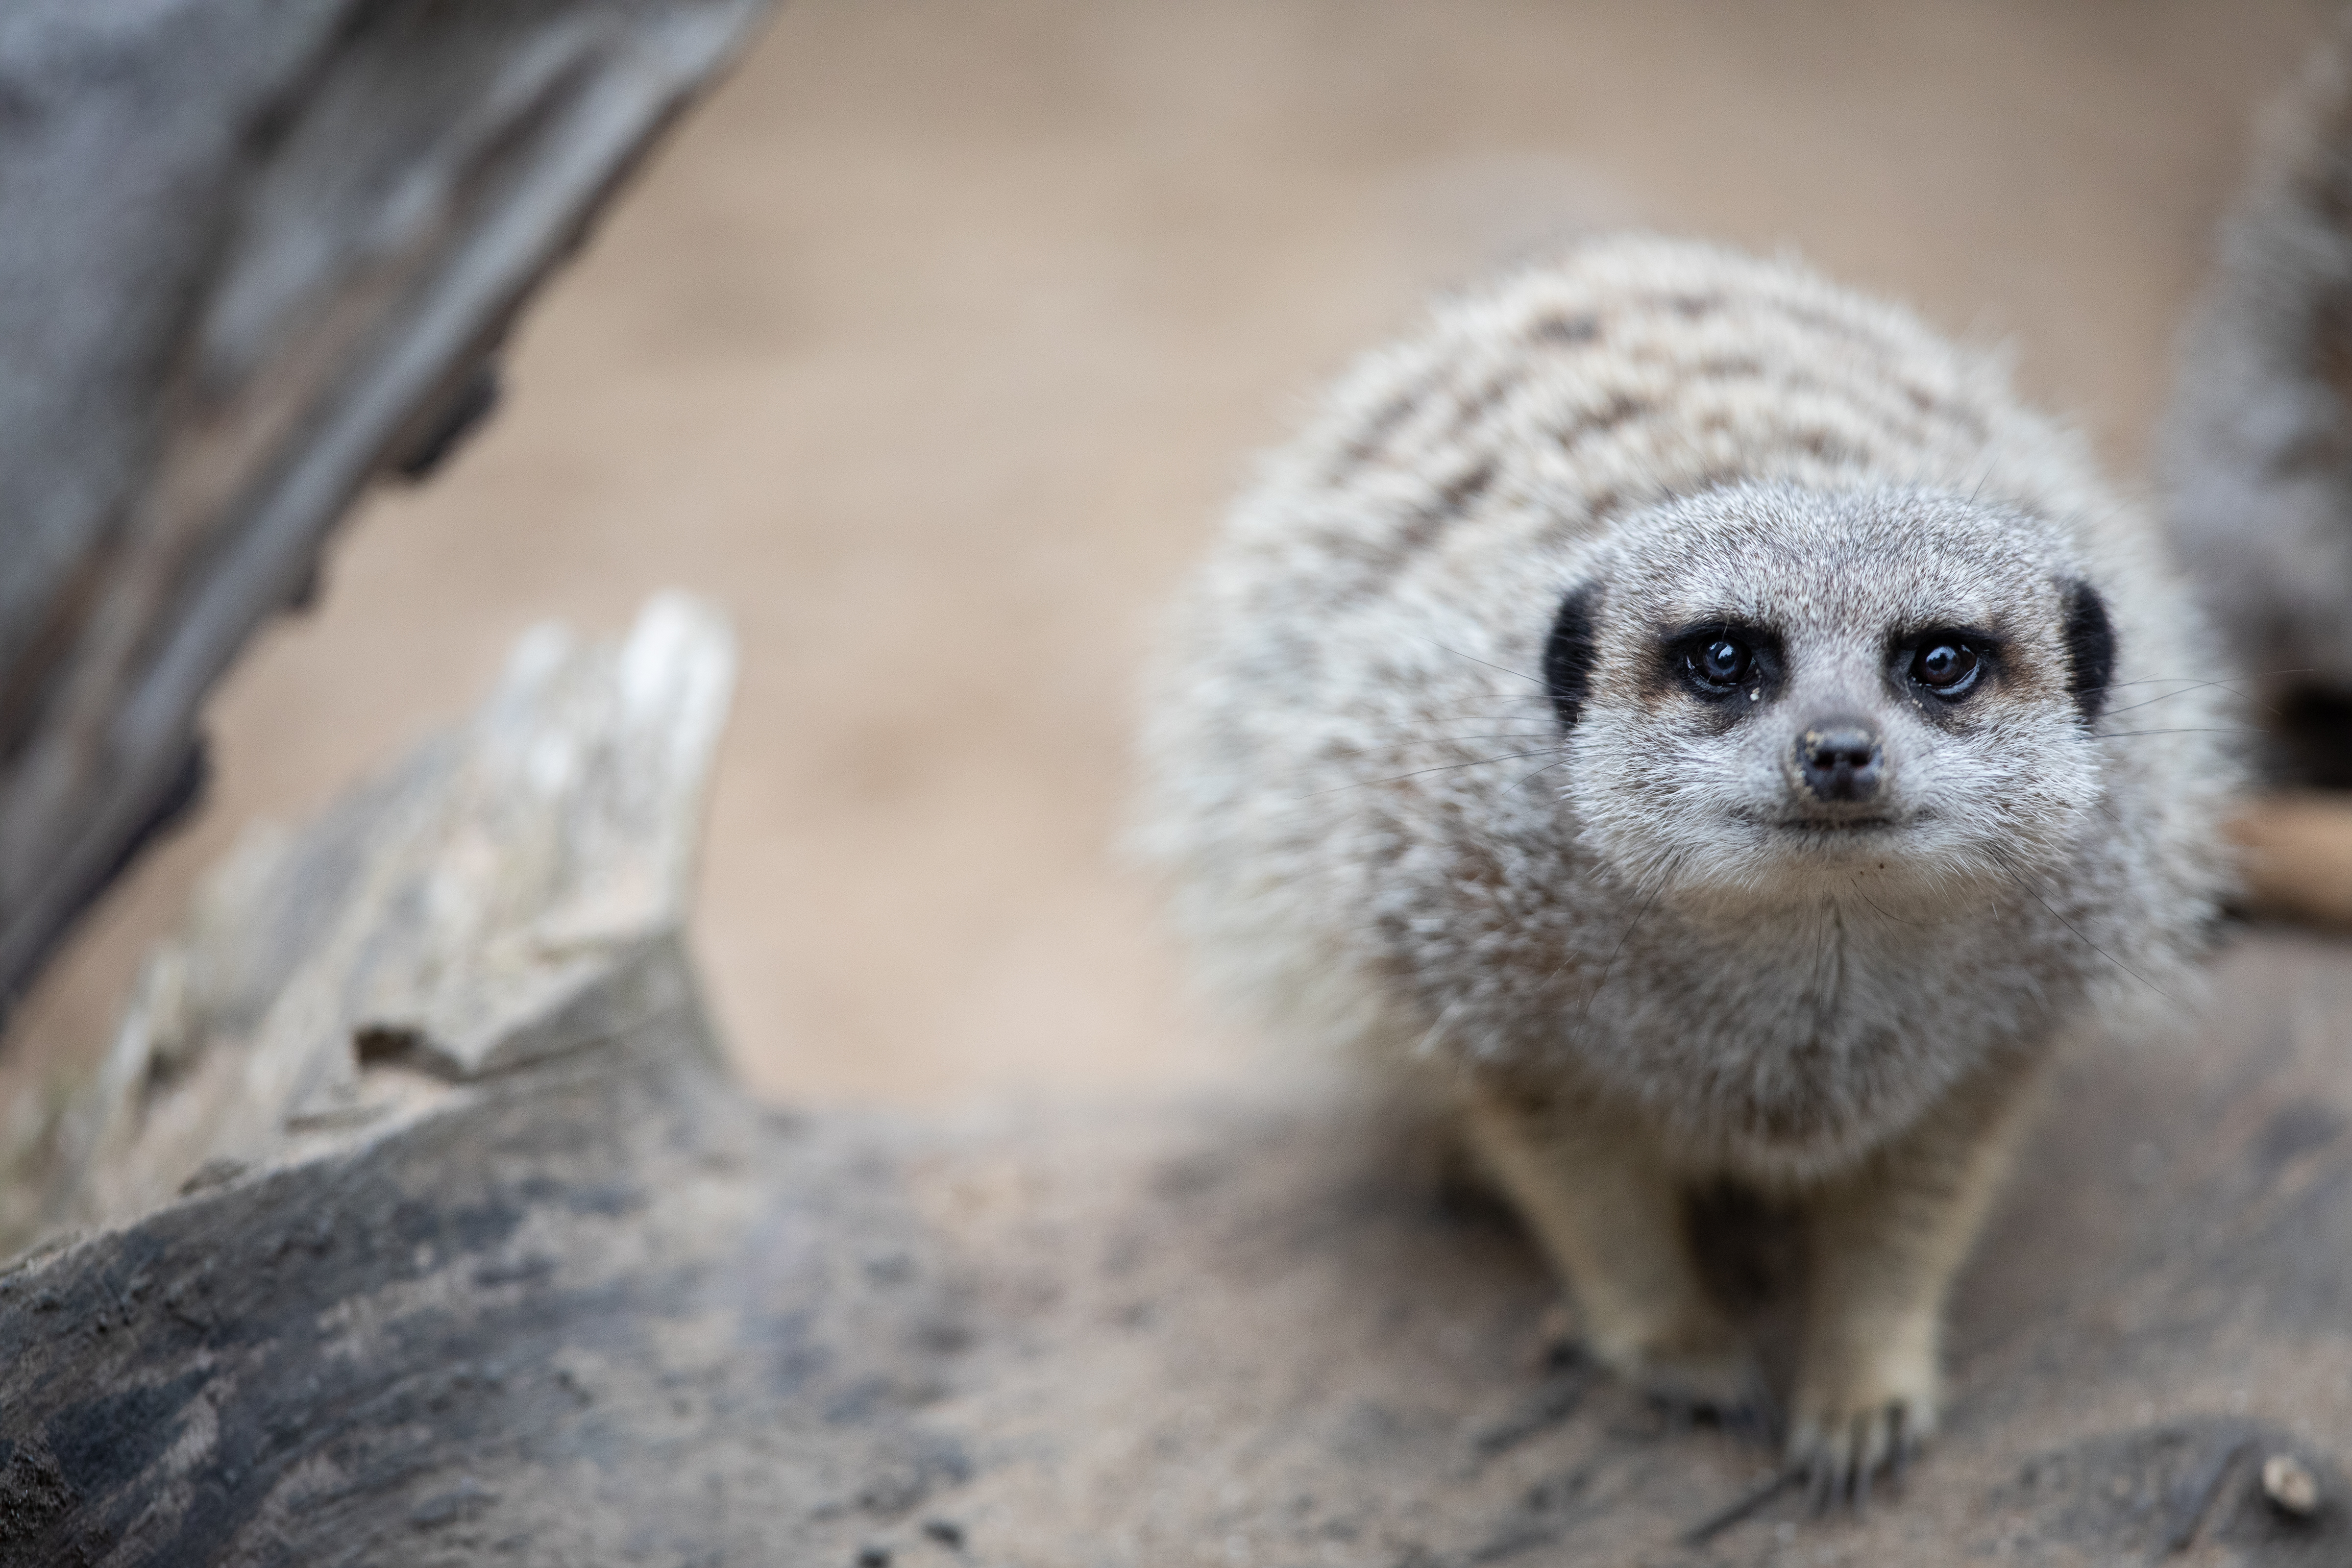 meerkat crouched down and looking up on a piece of wood